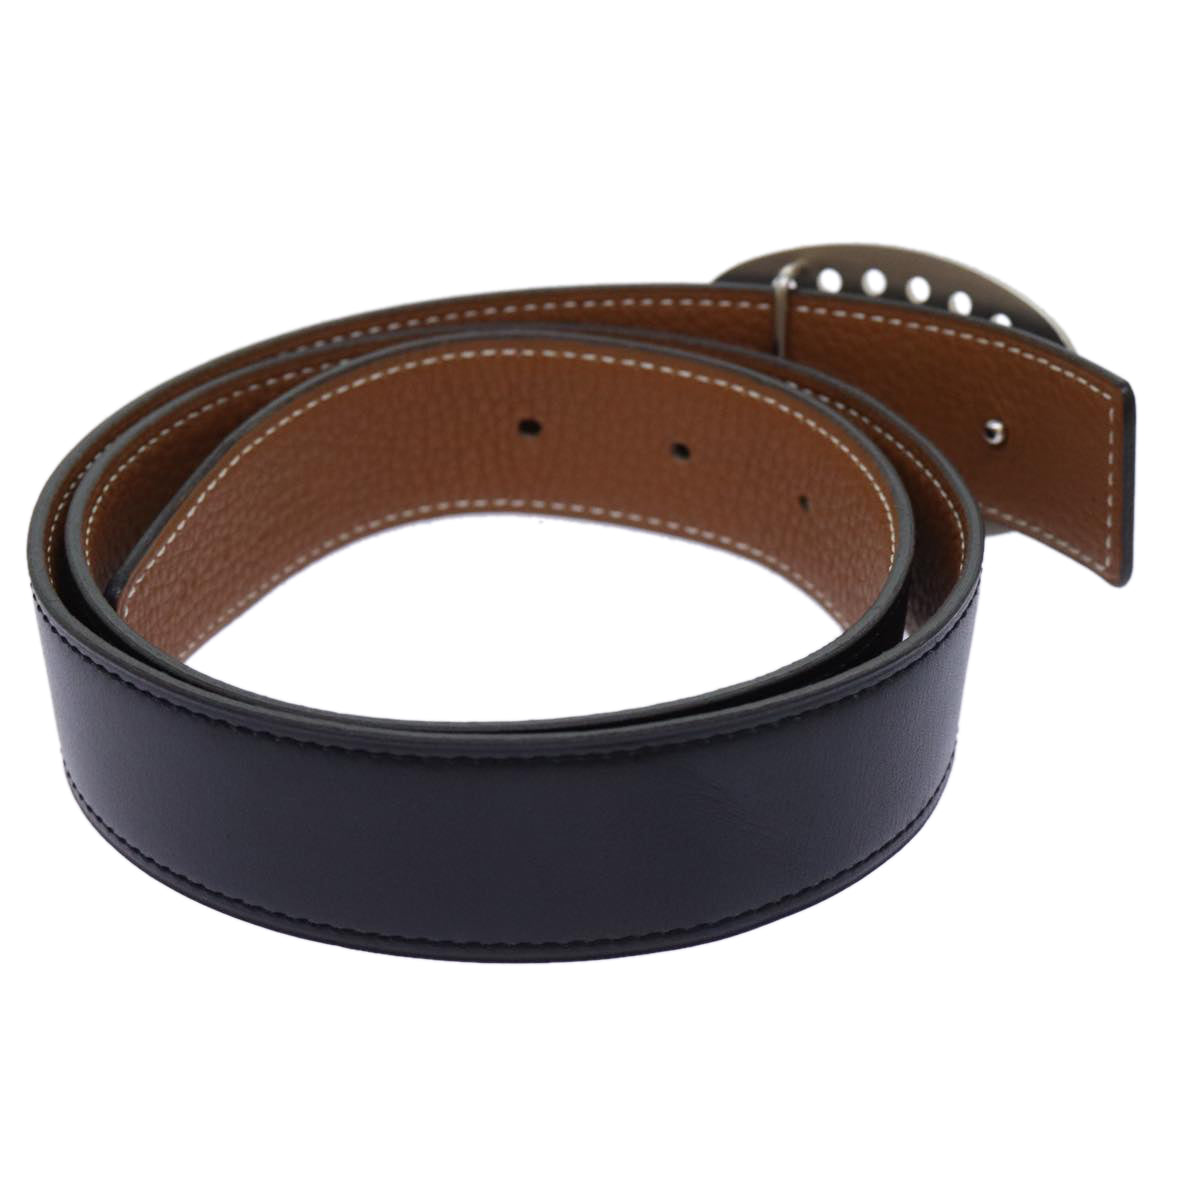 HERMES Evelyn oval buckle reversible Belt Leather Black Brown Auth am5971 - 0